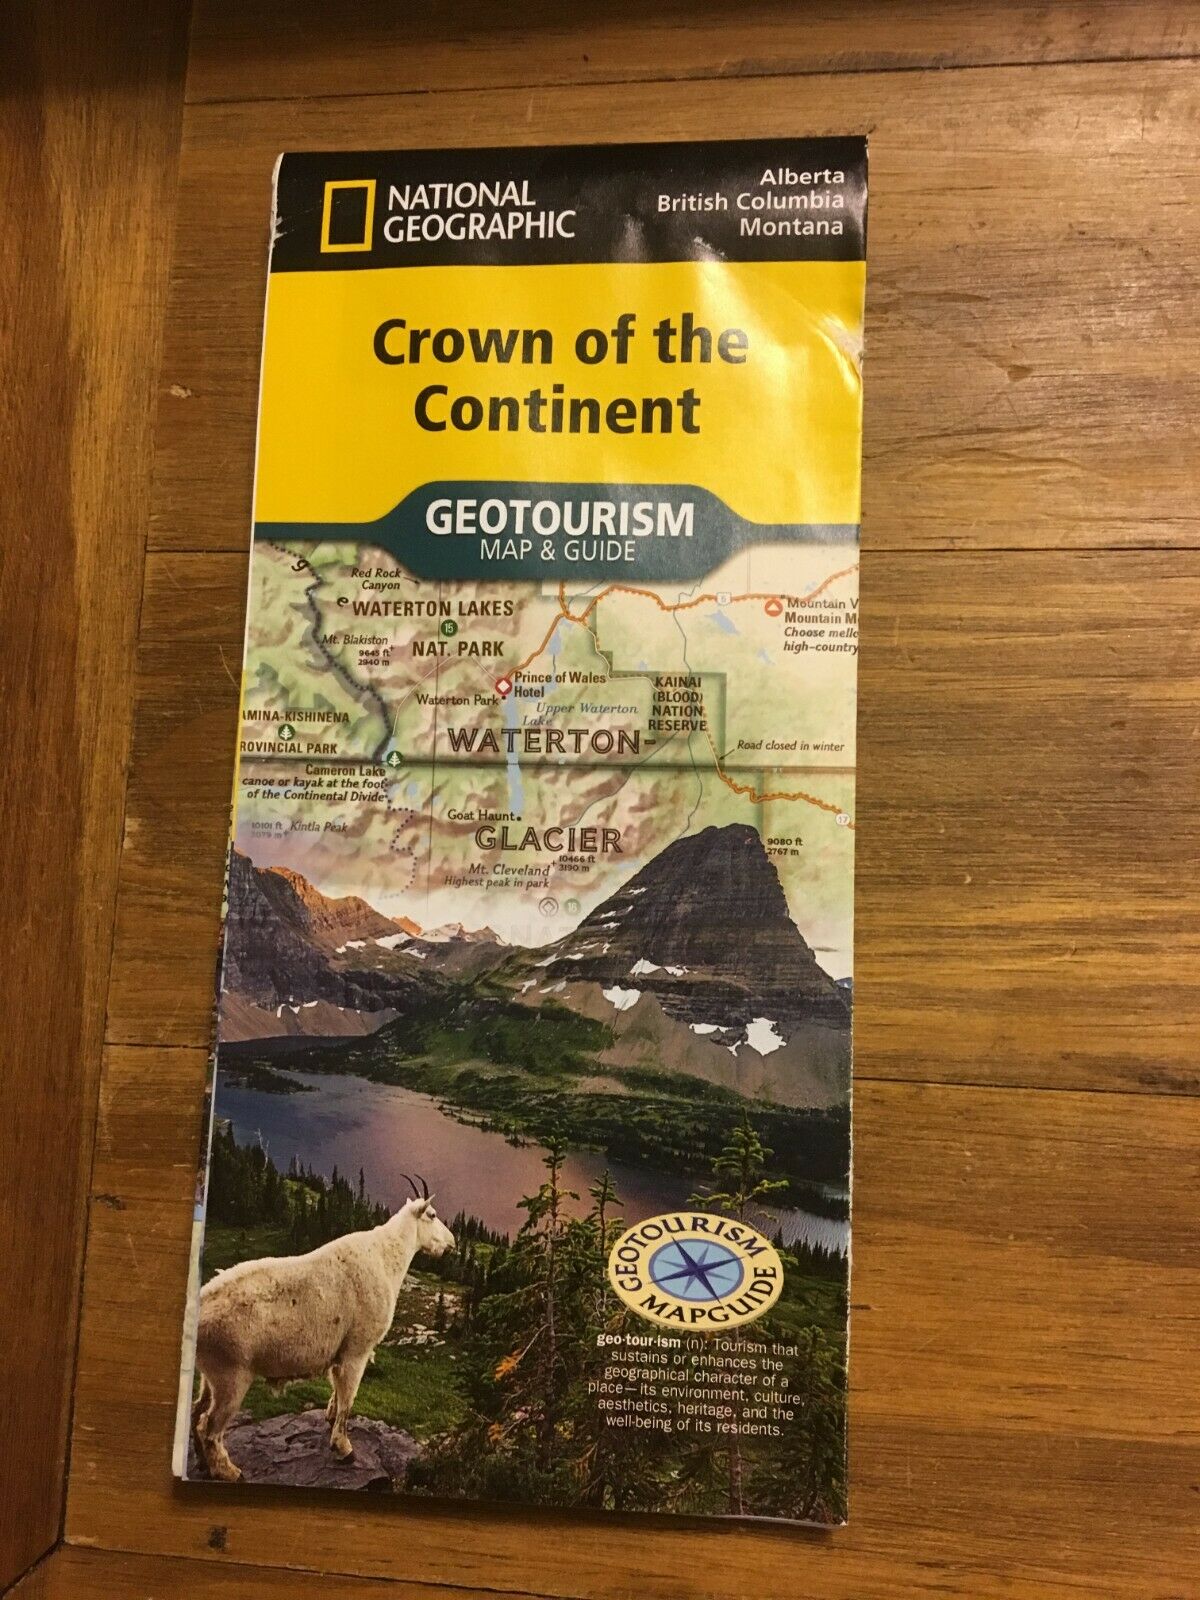 National Geographic Geotourism Map Guide Crown Continent Alberta B.c. Canada Mt